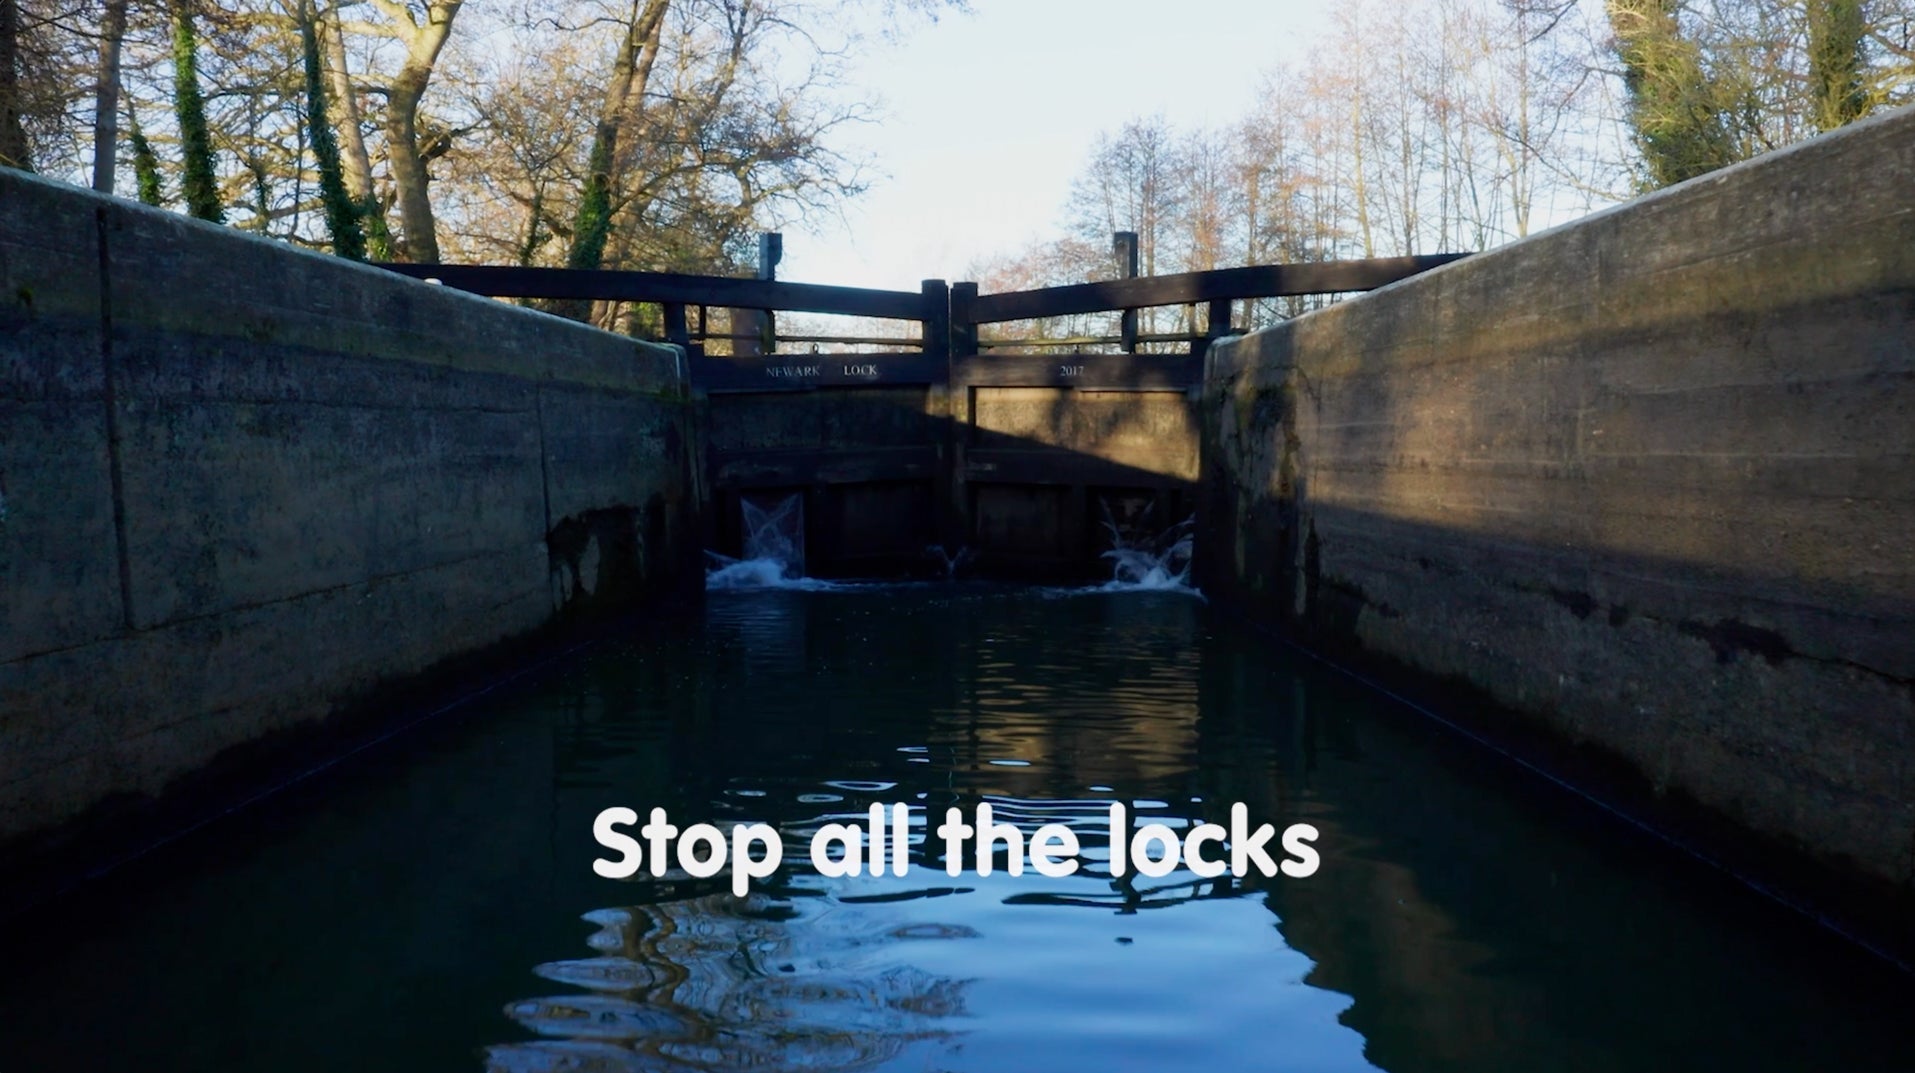 An image of a lock from within the waterway, with the text "Stop all the locks" overlaid